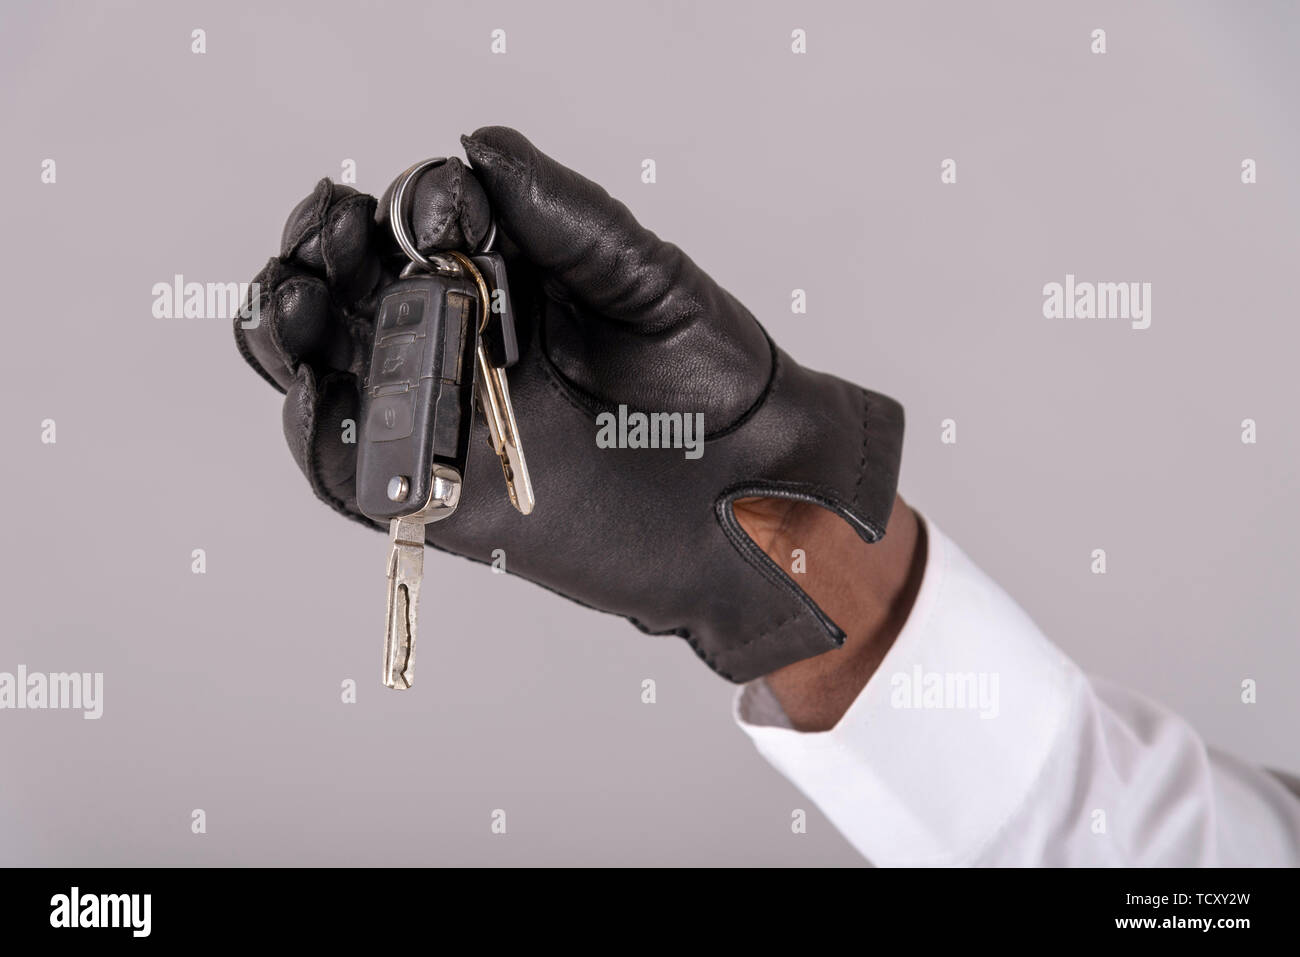 England, UK. May 2019. Man's hand wearing a black leather glove holding ignition keys for a vehicle, Stock Photo